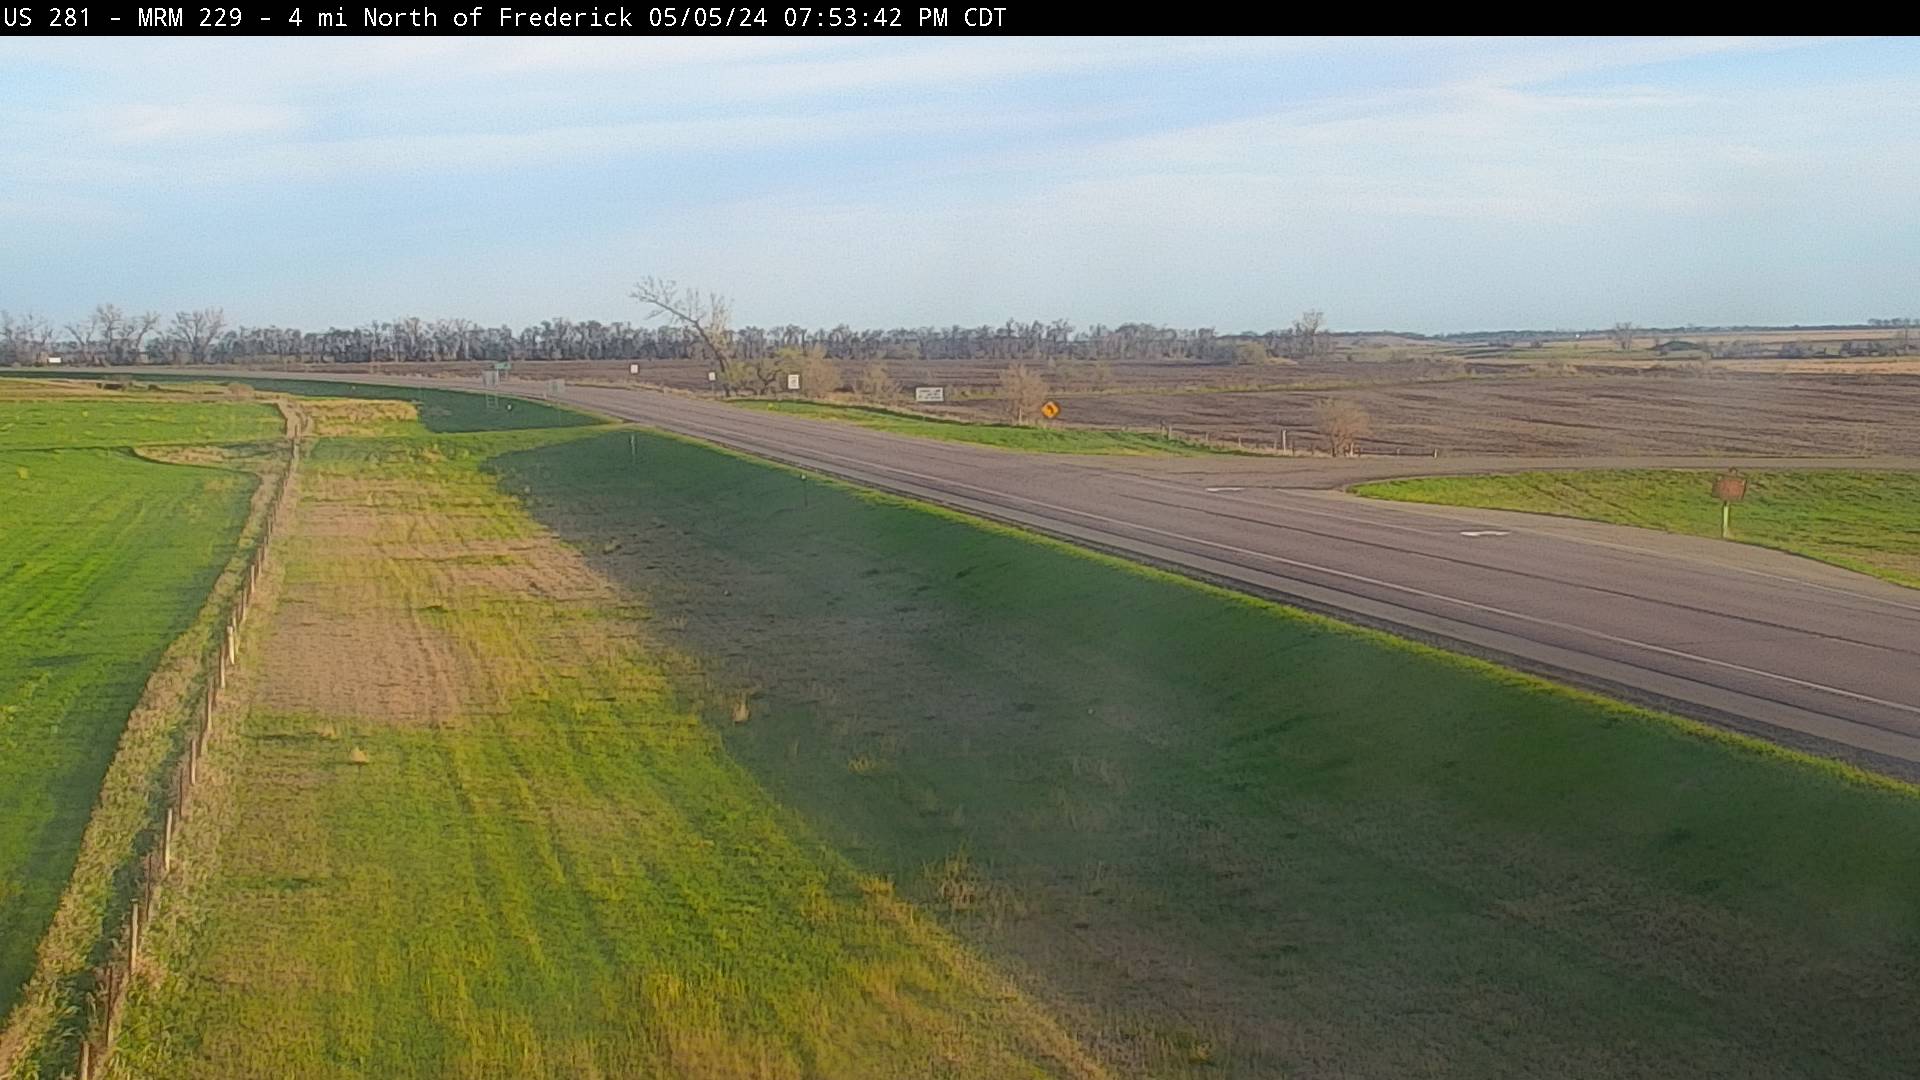 Traffic Cam North of town along US-281 near ND border - South Player